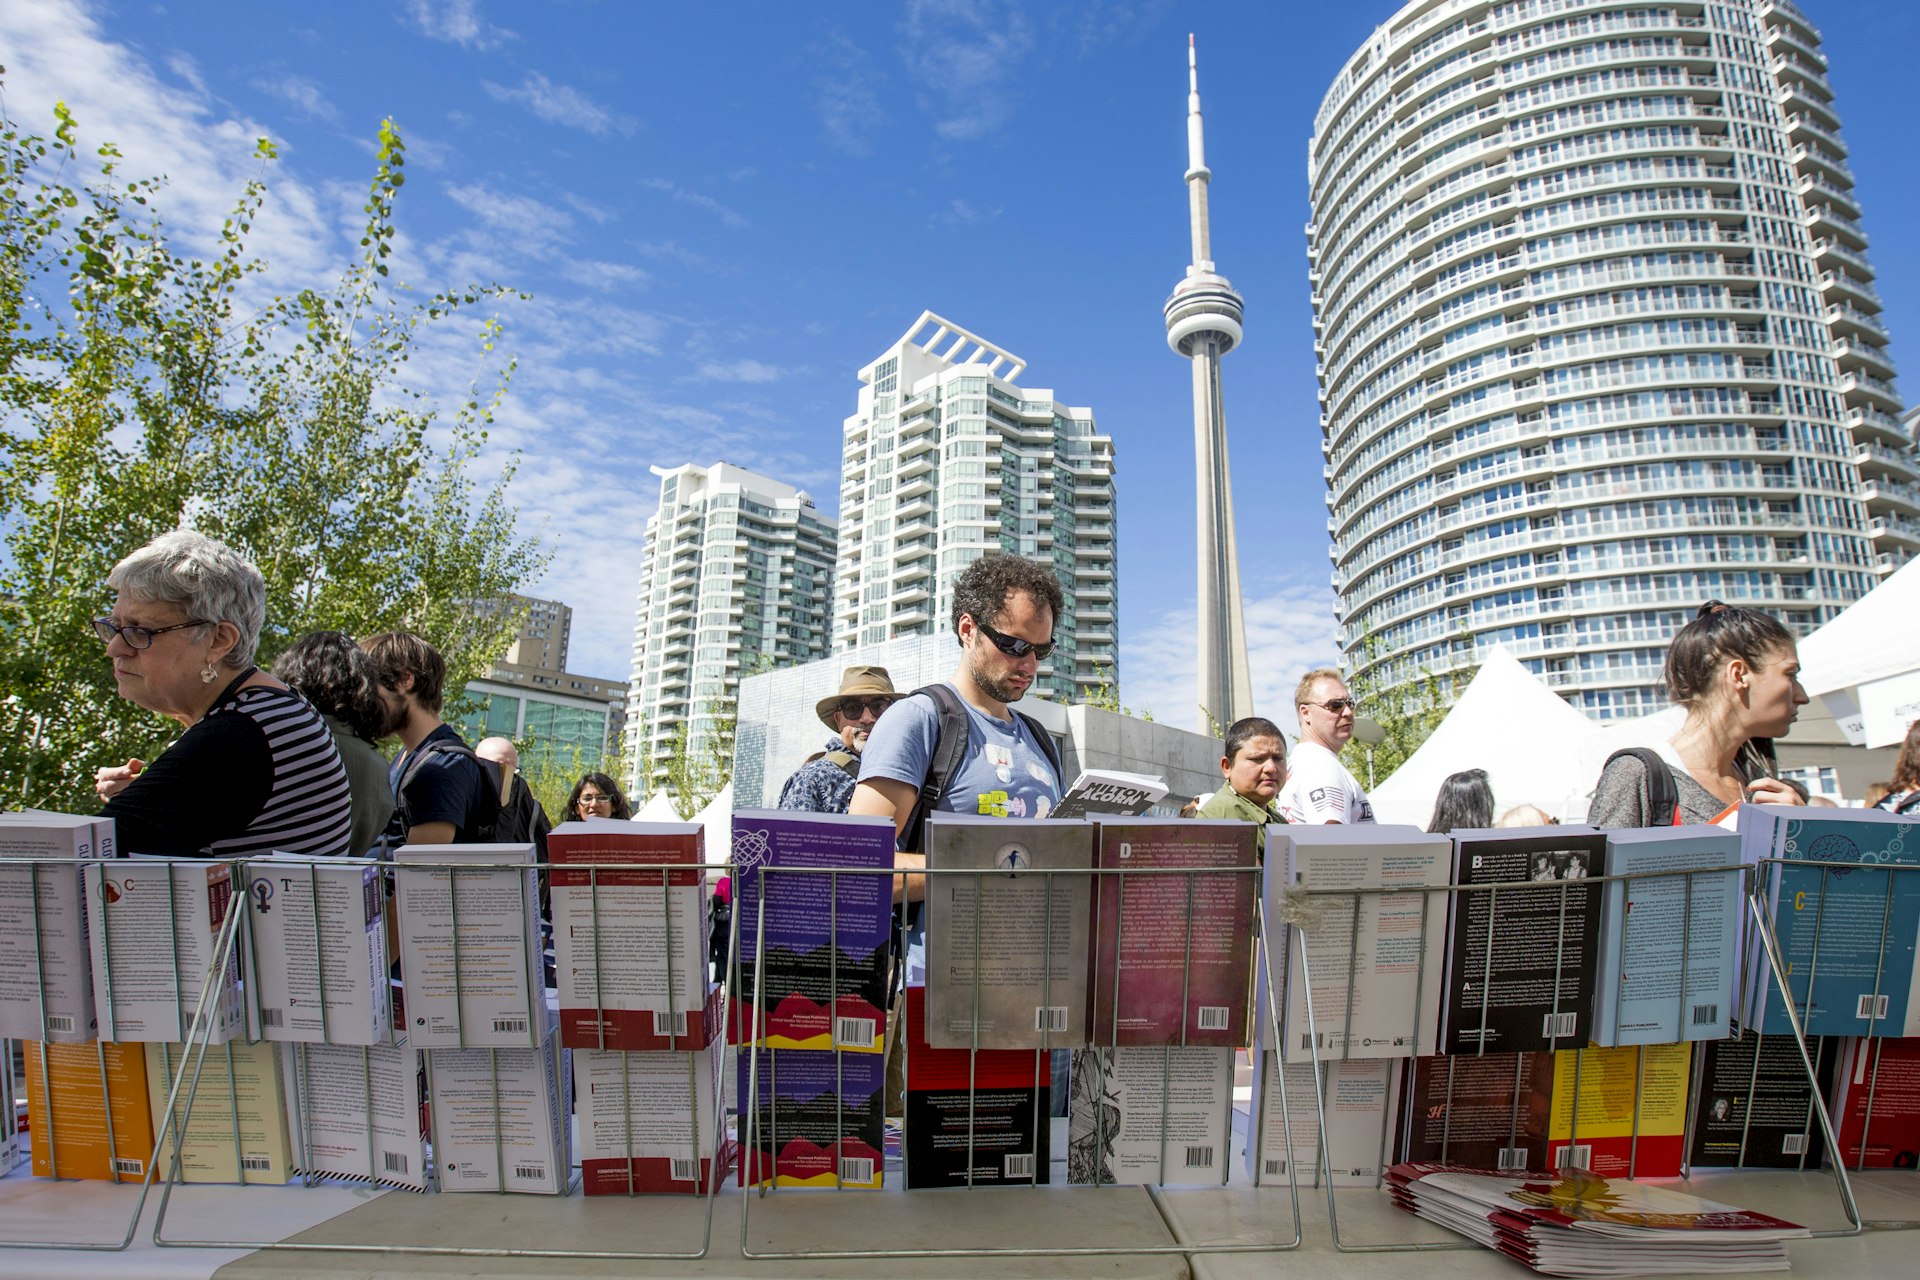 People browse for books on stall outside in the city of Toronto on a sunny day